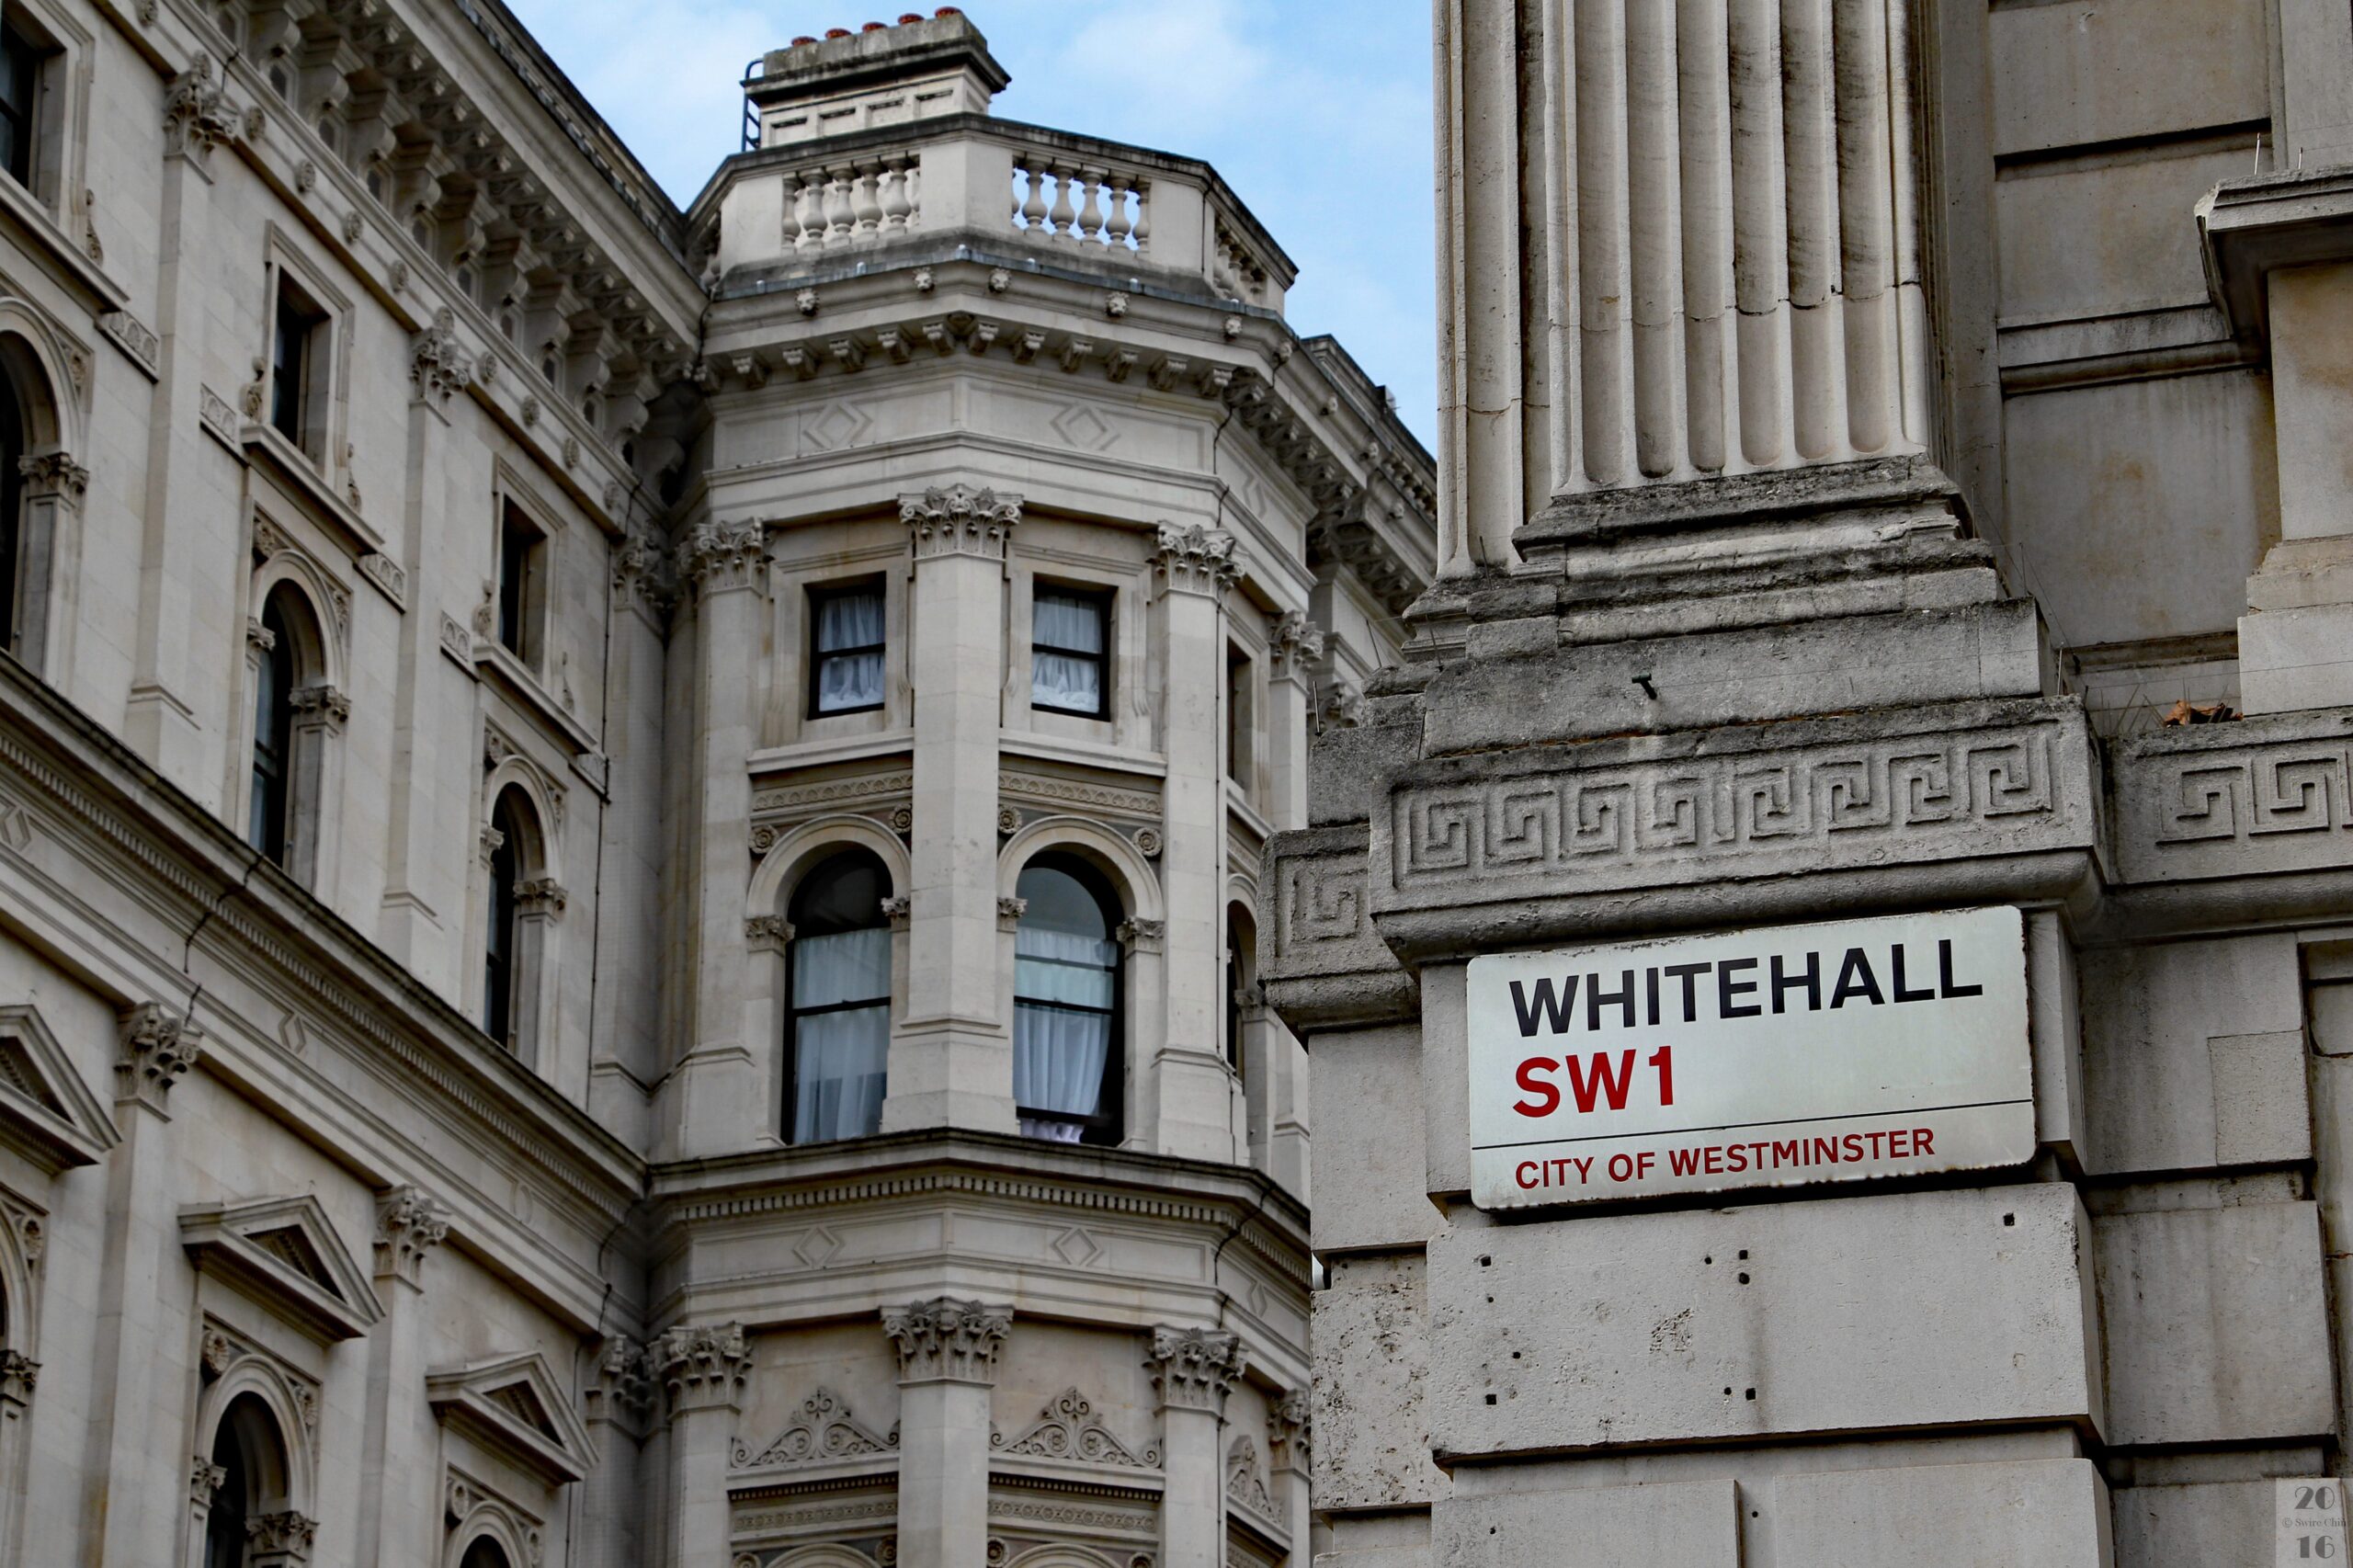 Change in Whitehall has to come…